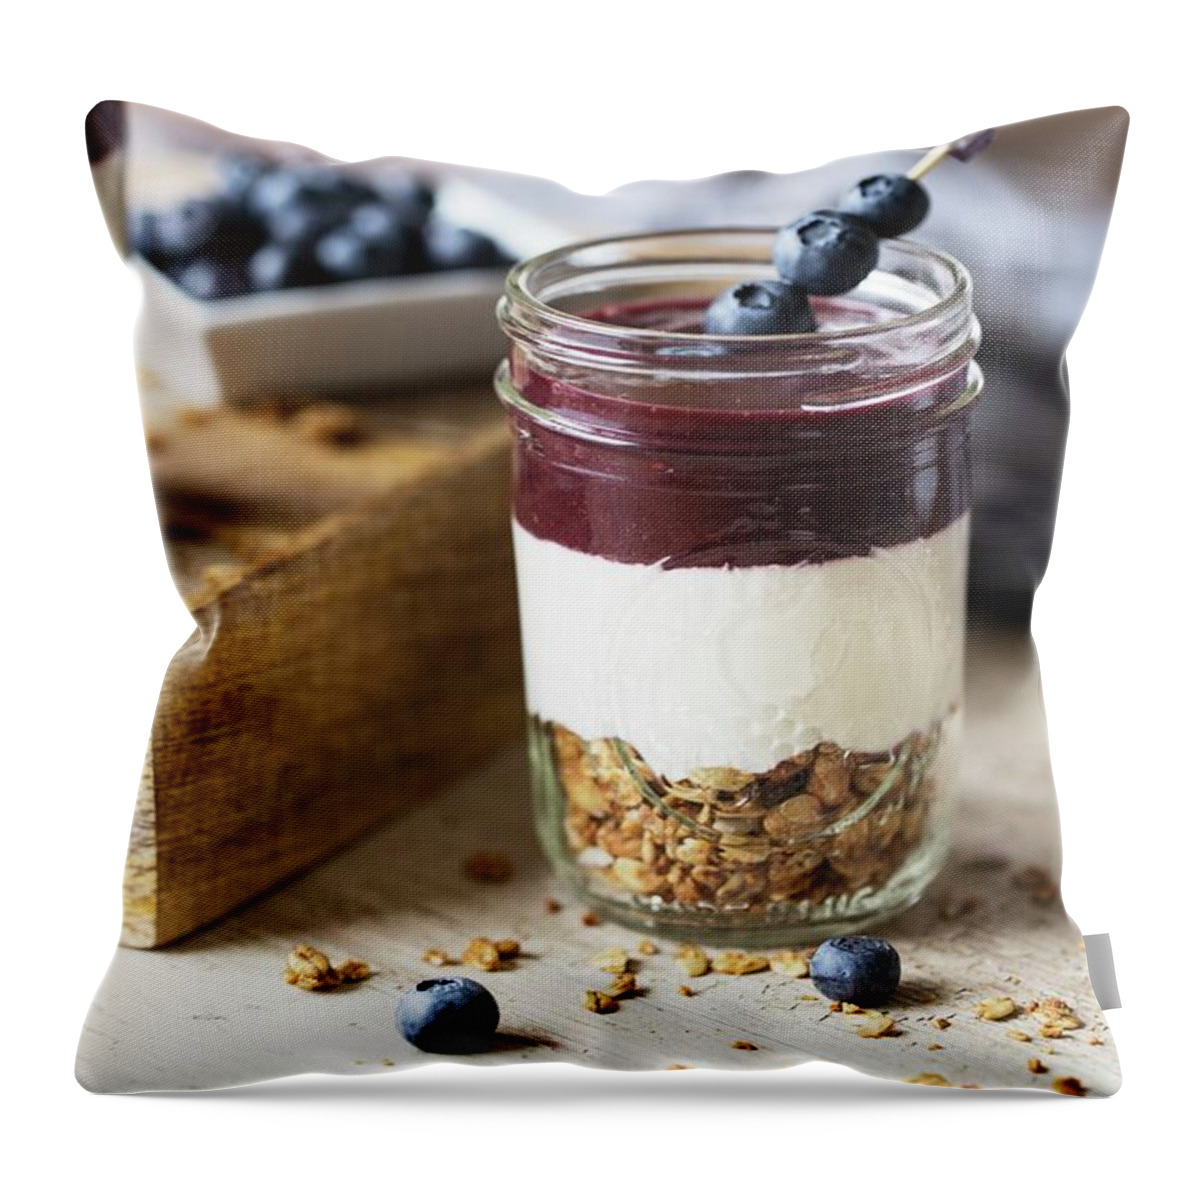 Ip_12316071 Throw Pillow featuring the photograph Layered Granola, Yoghurt And Acai Puree, Garnished With Blueberries by Nicole Godt